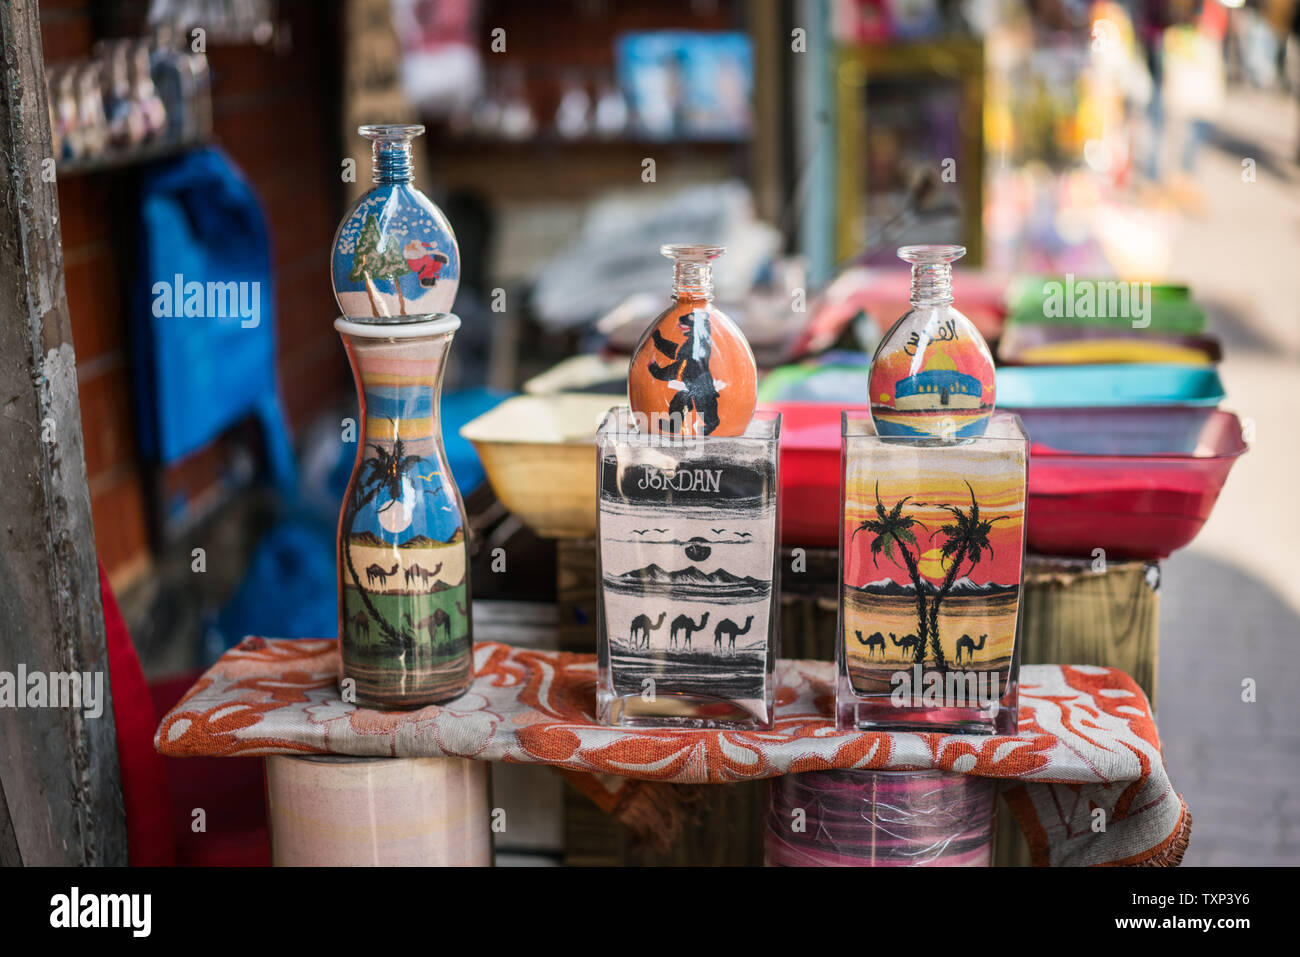 where to buy souvenirs in amman